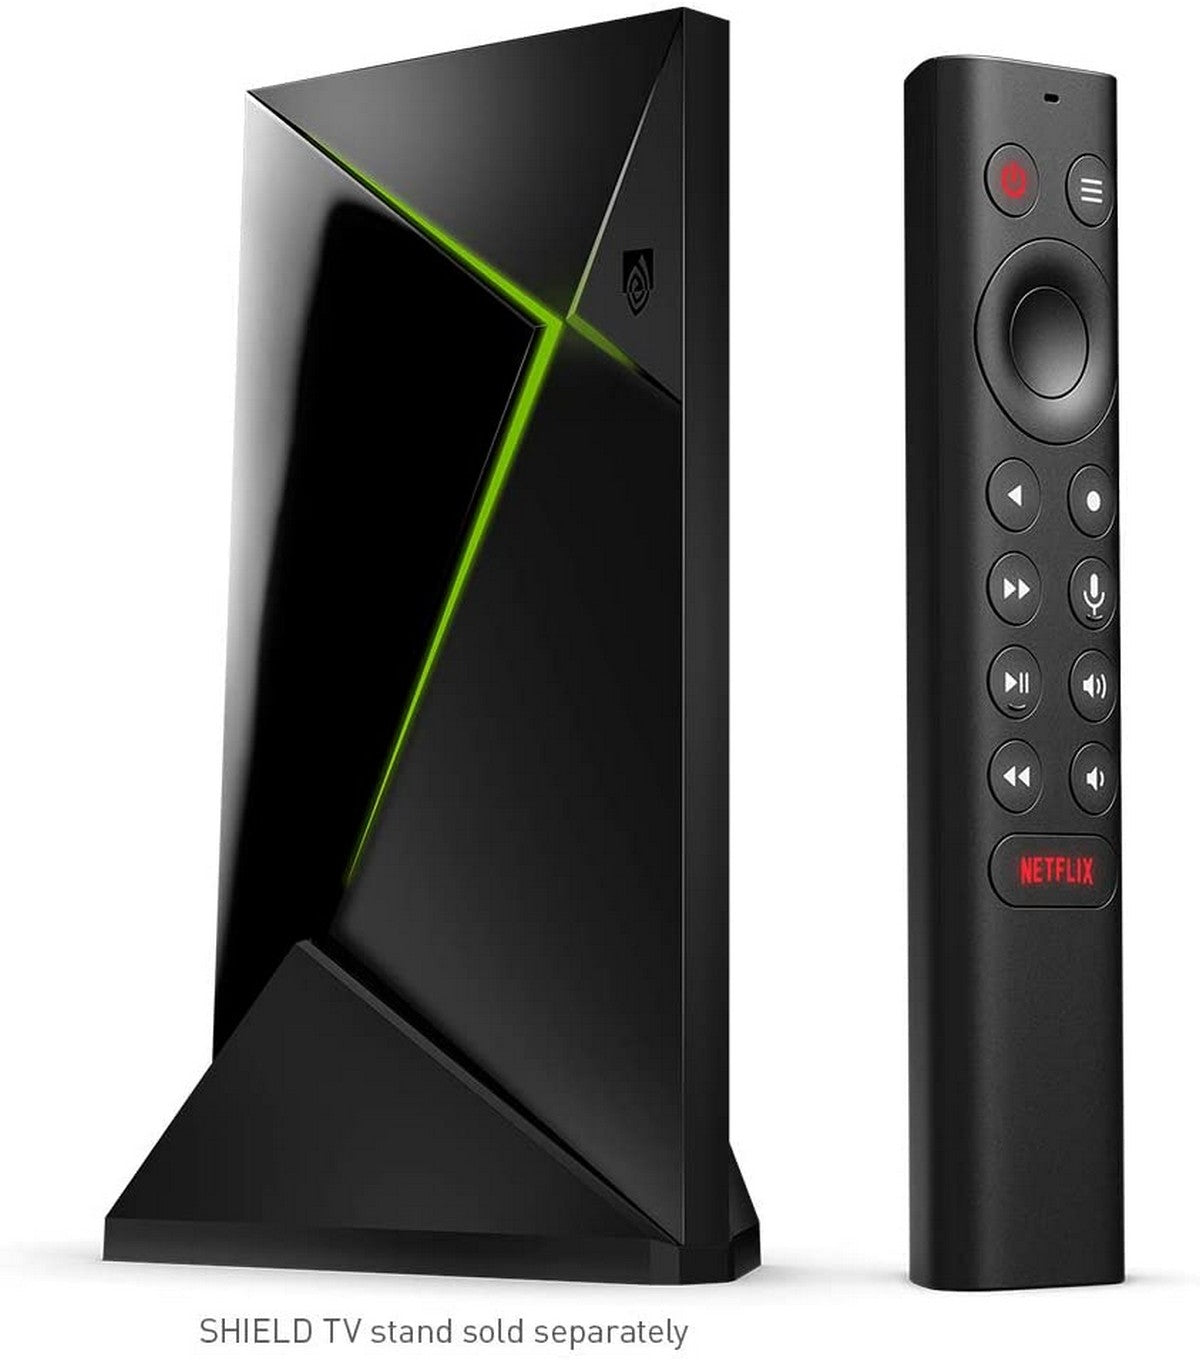 NVIDIA SHIELD Android TV 4K HDR Streaming Media Player; High Performance, Dolby Vision, Google Assistant Built-In, Works with Alexa front